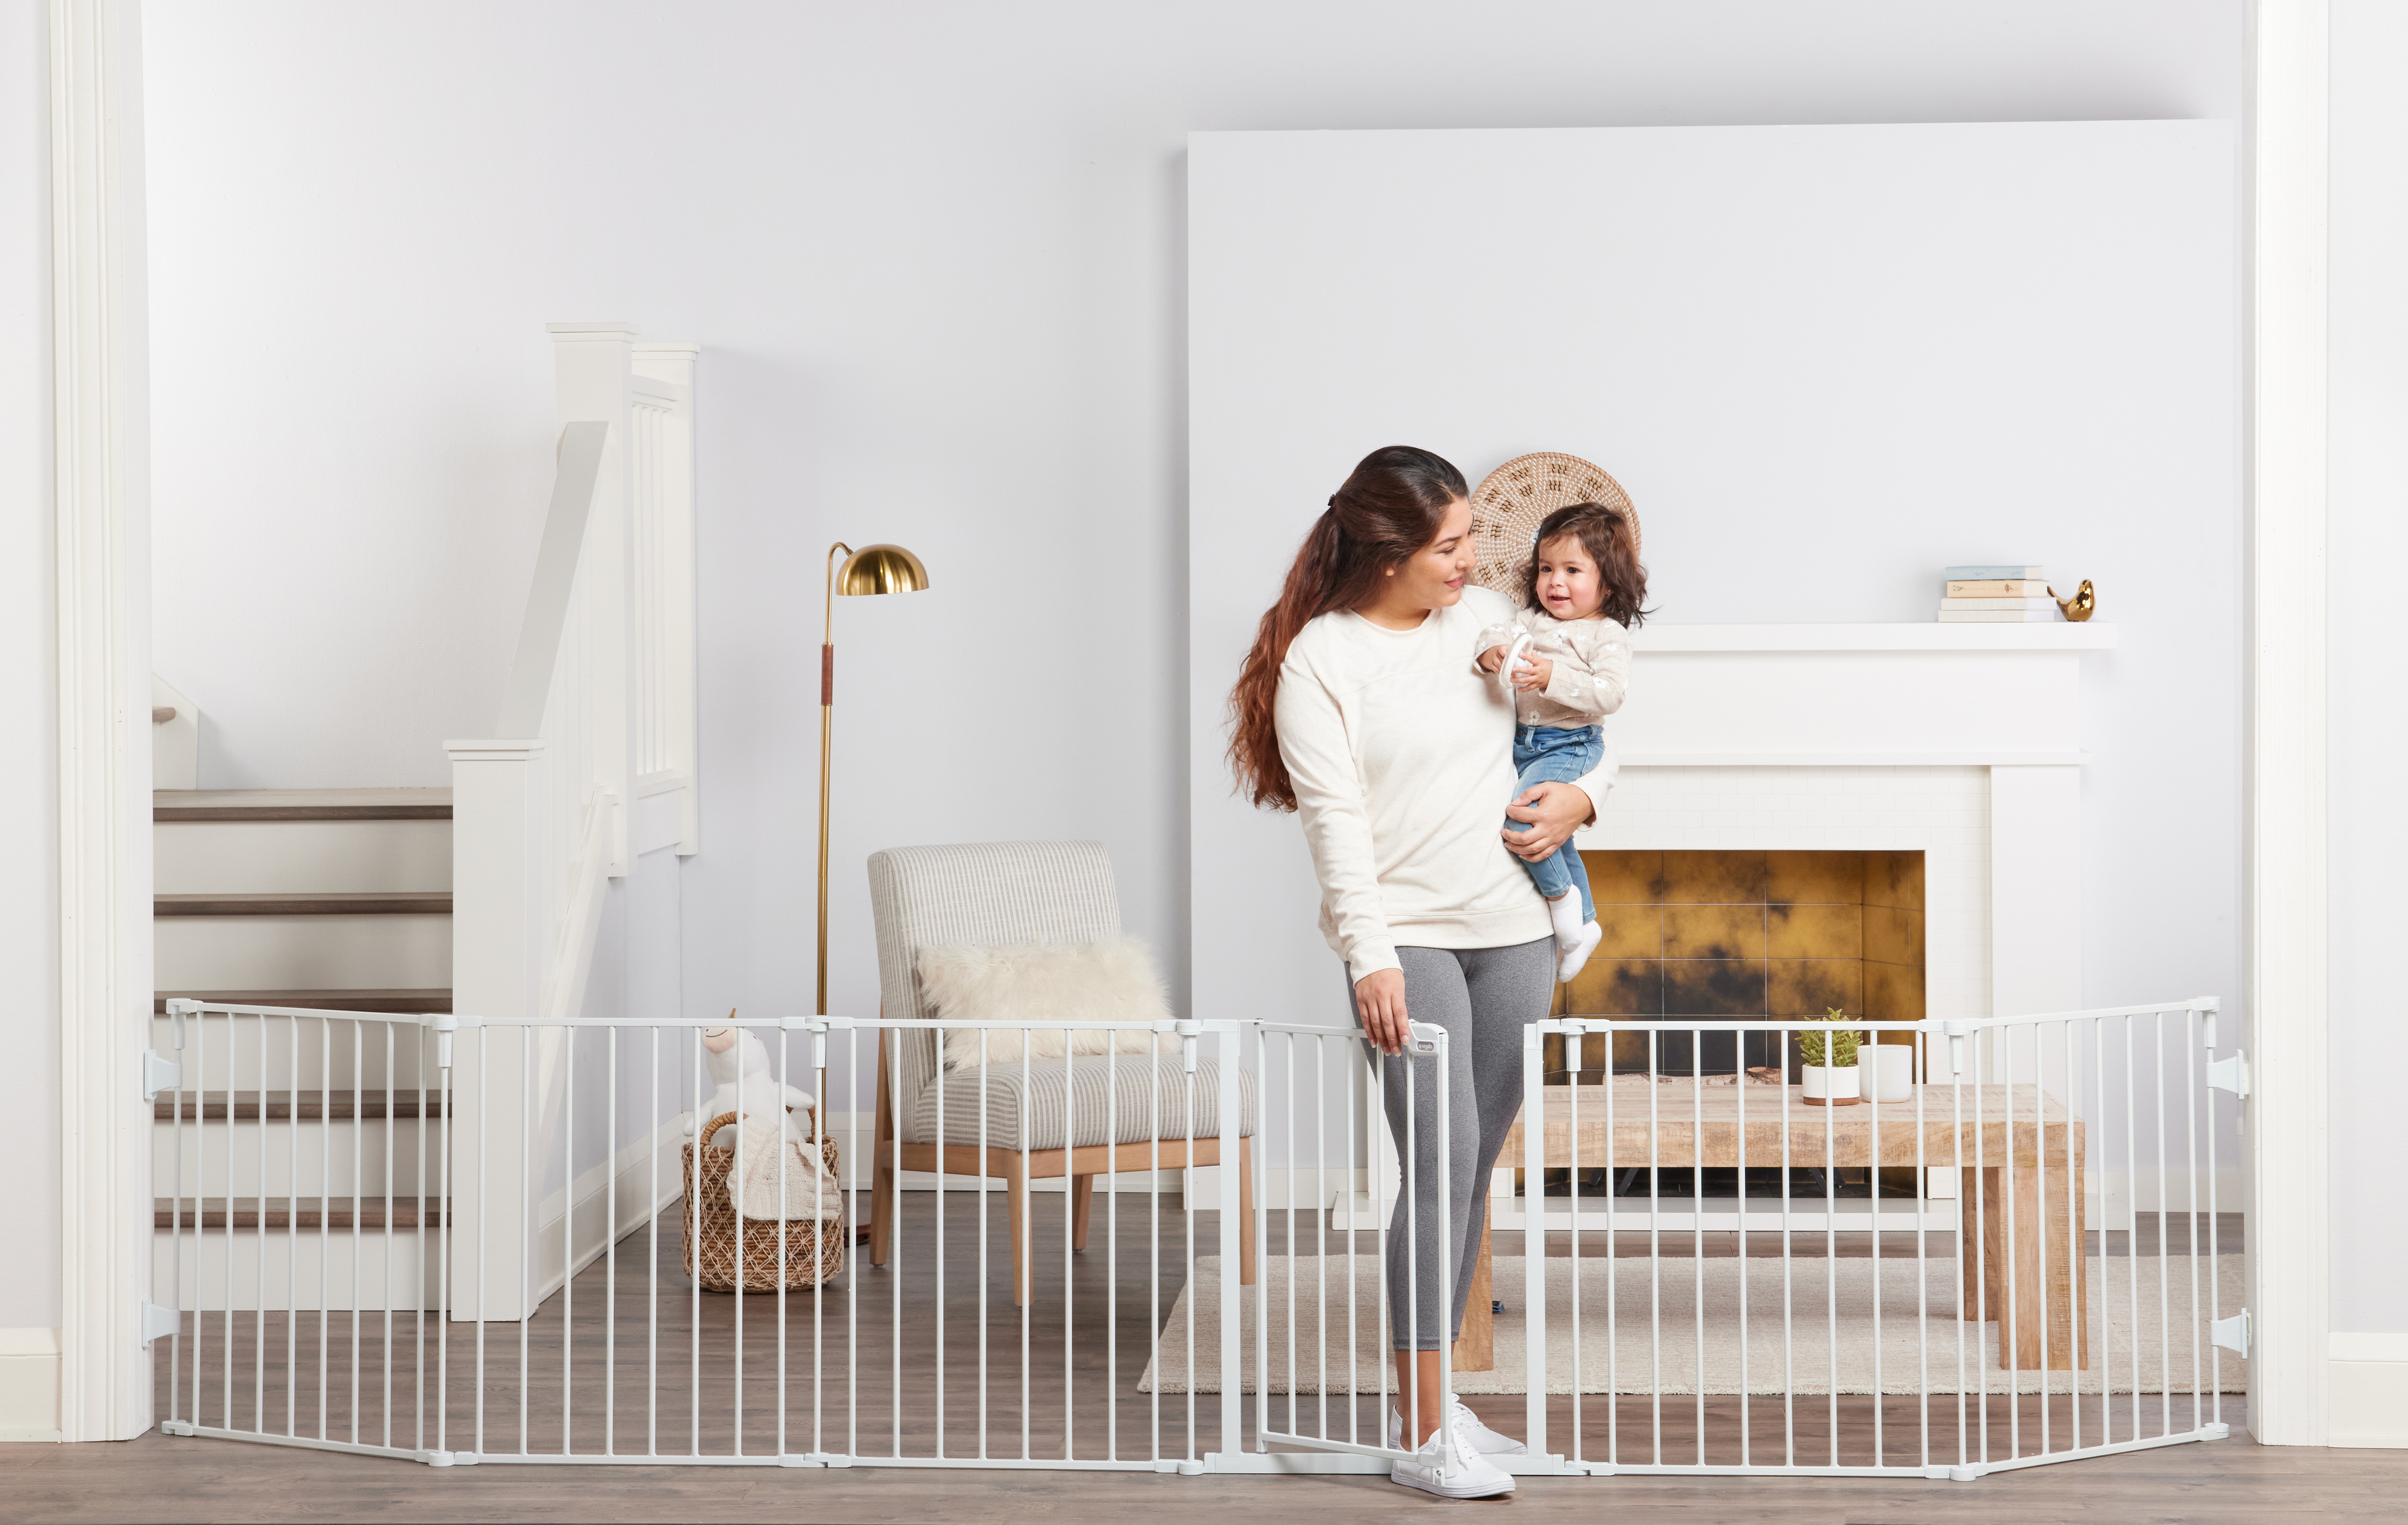 Regalo Super Wide Baby Gate, Features Play Yard Option, White, 144", Age Group 6-24 Months - image 2 of 7